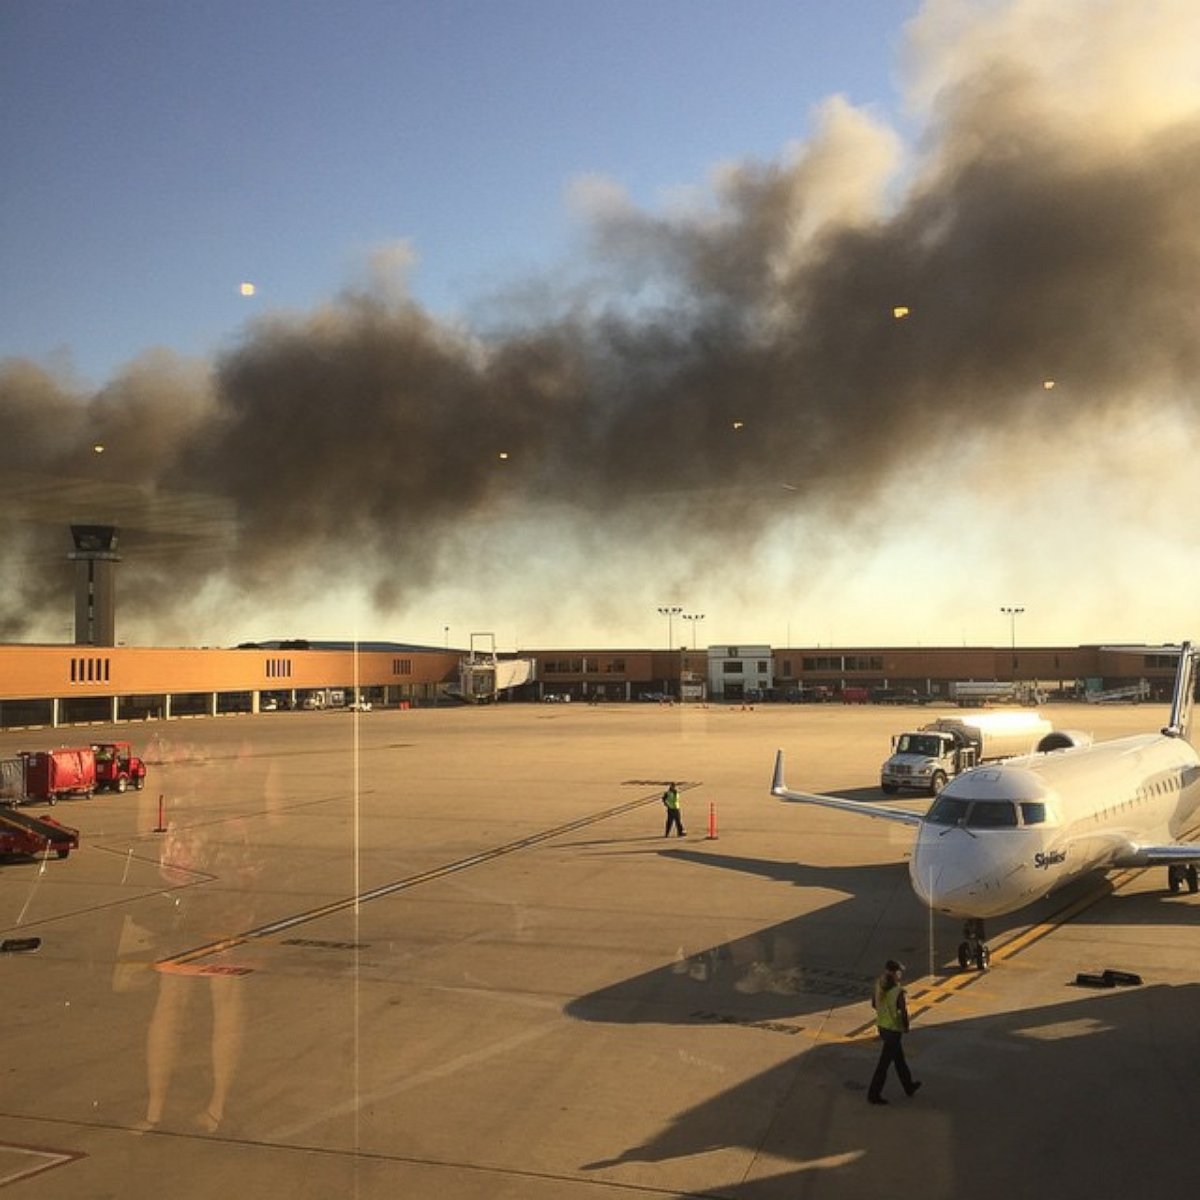 PHOTO:  A passenger at the Mid Continent airport in Wichita, Kansas posted this photo to Instagram on Oct. 30, 2014 with the caption, "Not exactly what you want to see before boarding an airplane. #fire"